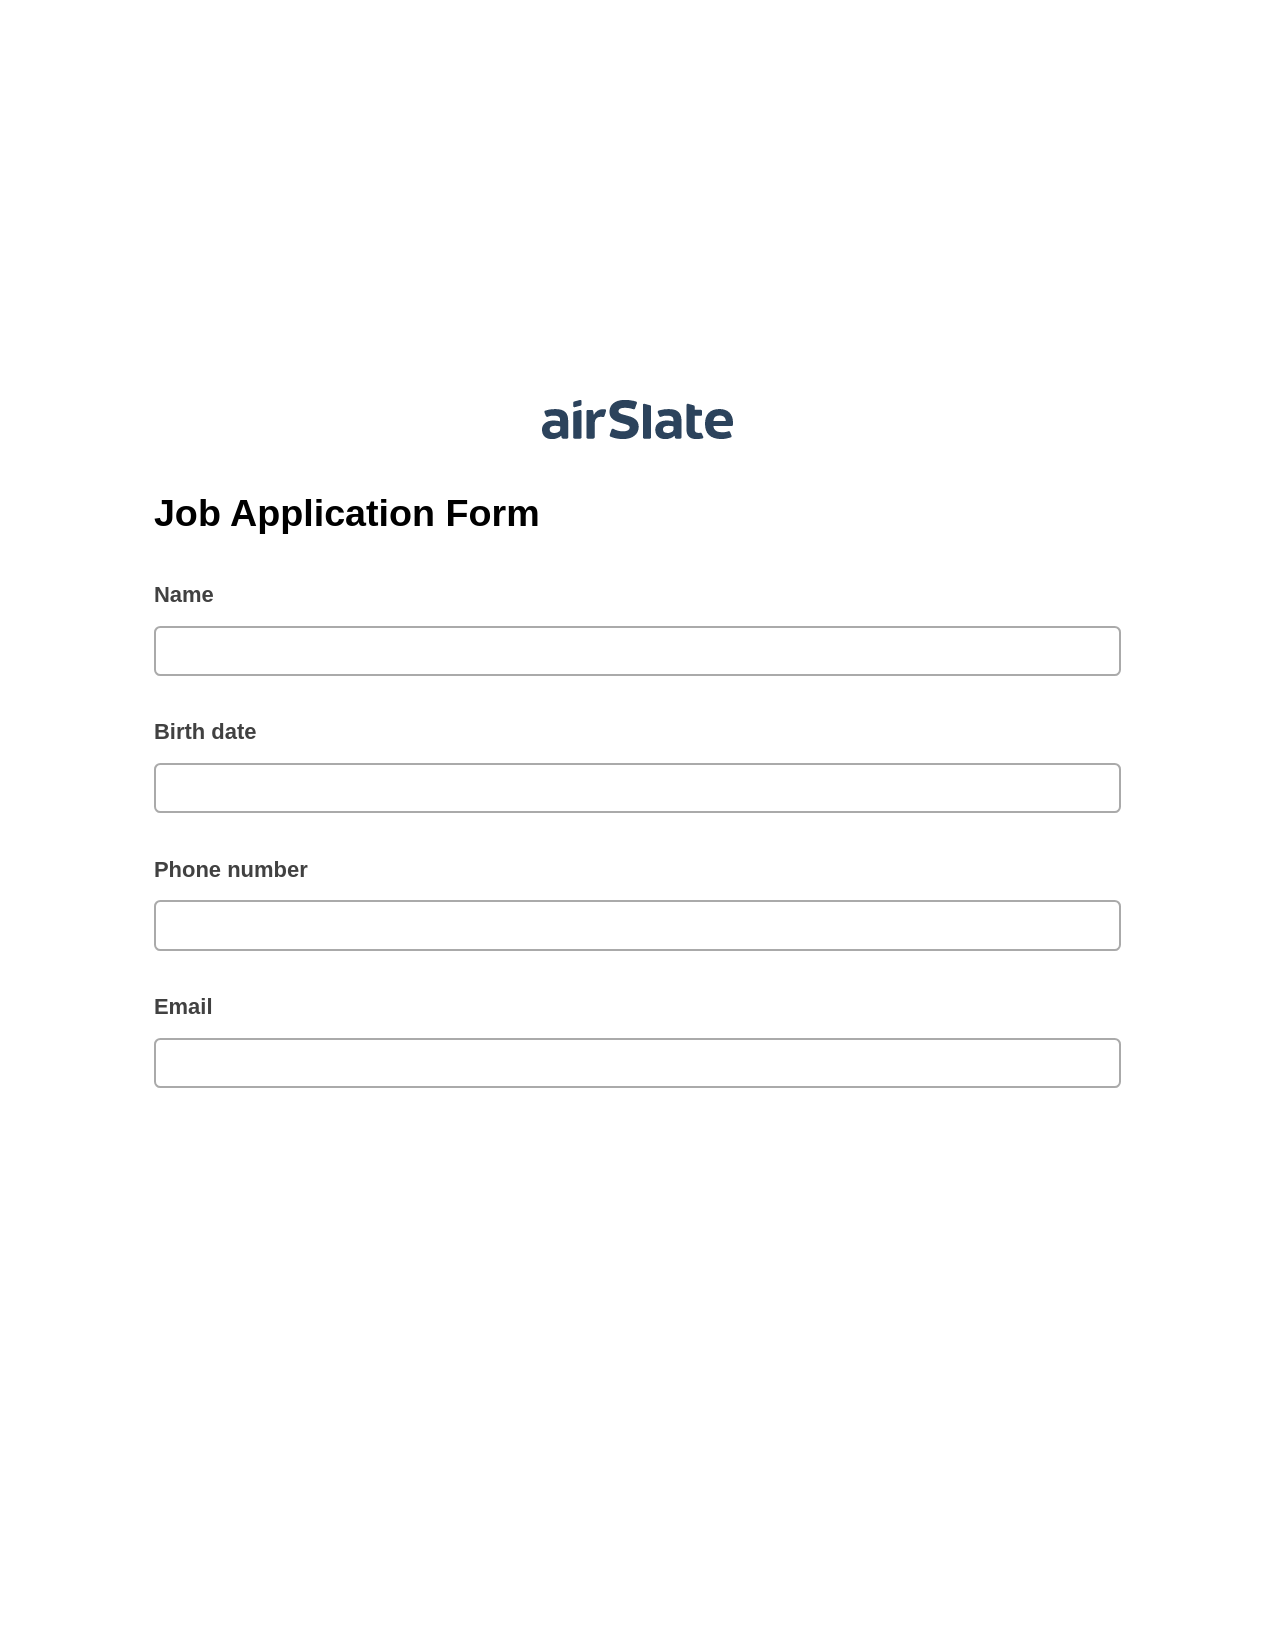 Multirole Job Application Form Pre-fill Dropdown from Airtable, Google Cloud Print Bot, Export to Google Sheet Bot